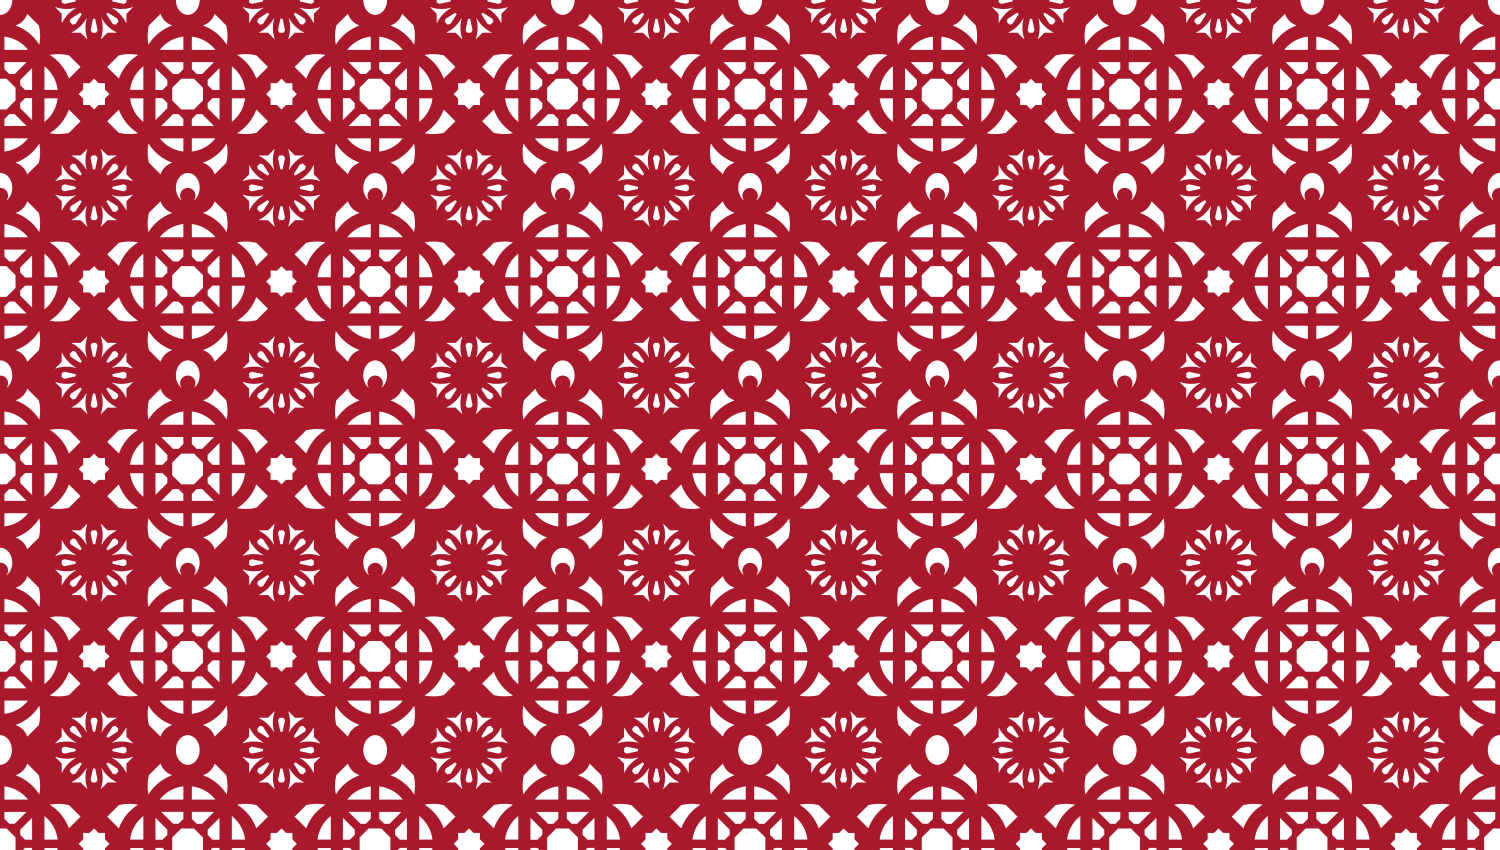 Parasoleil™ Casablanca© pattern displayed with a standard color overlay